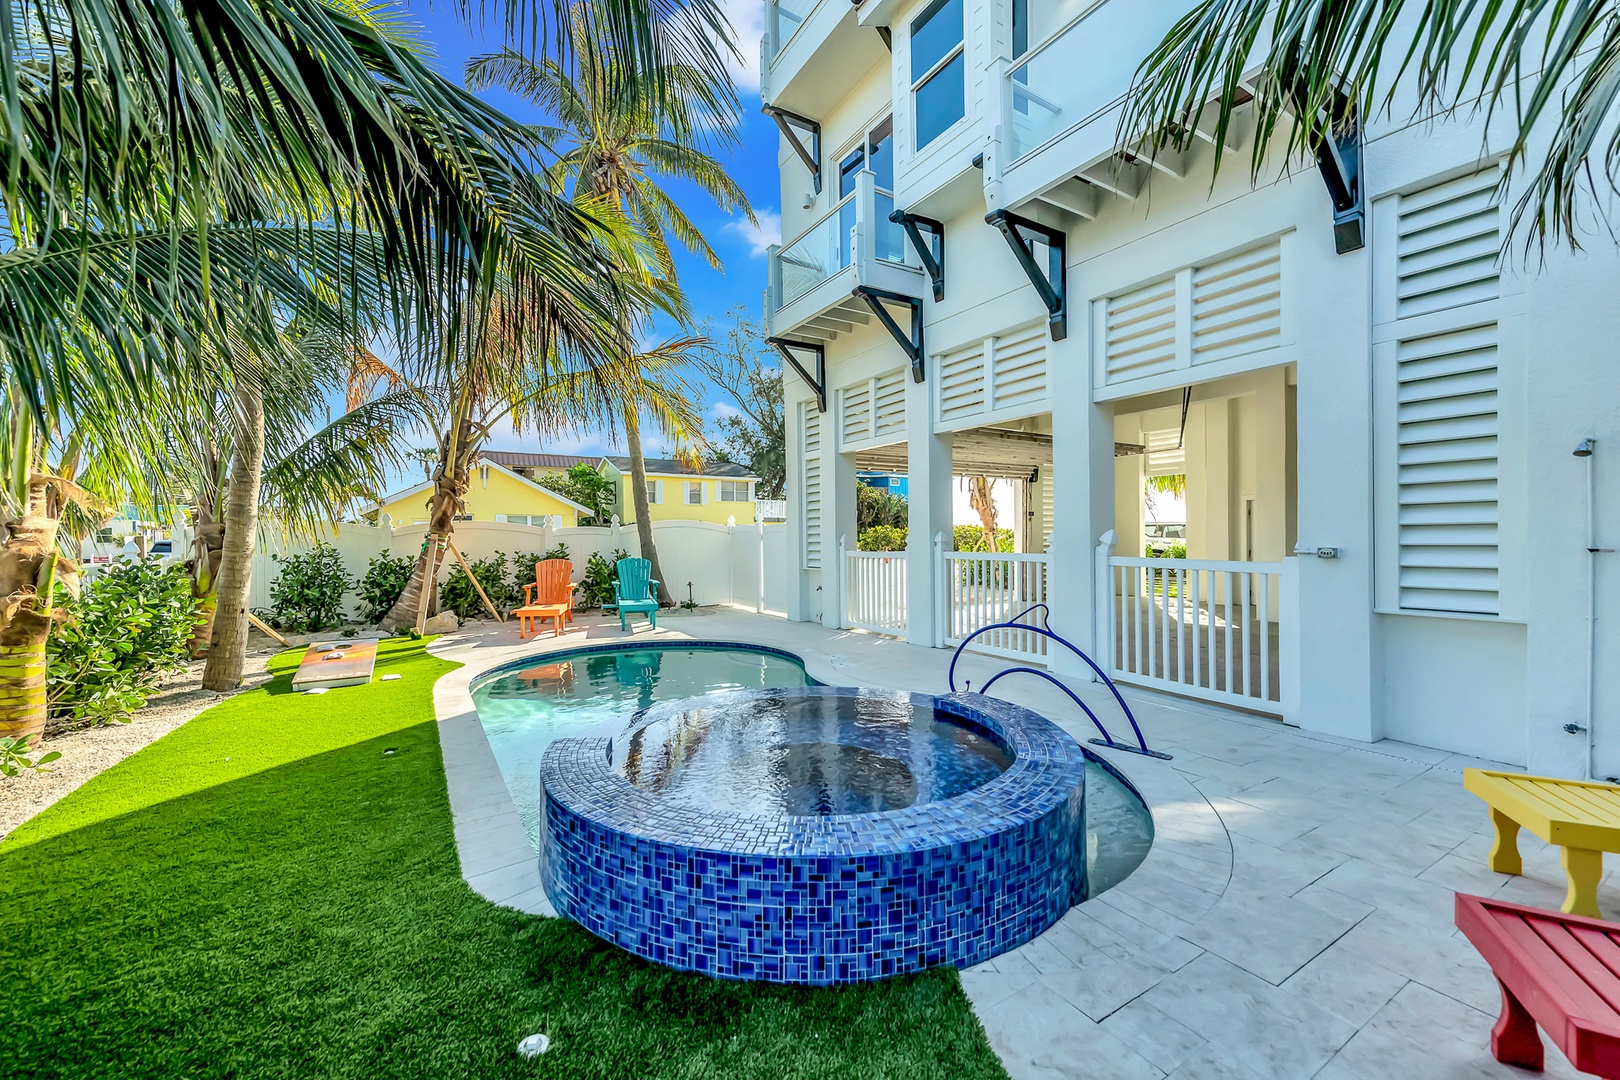 Private Pool and hot tub